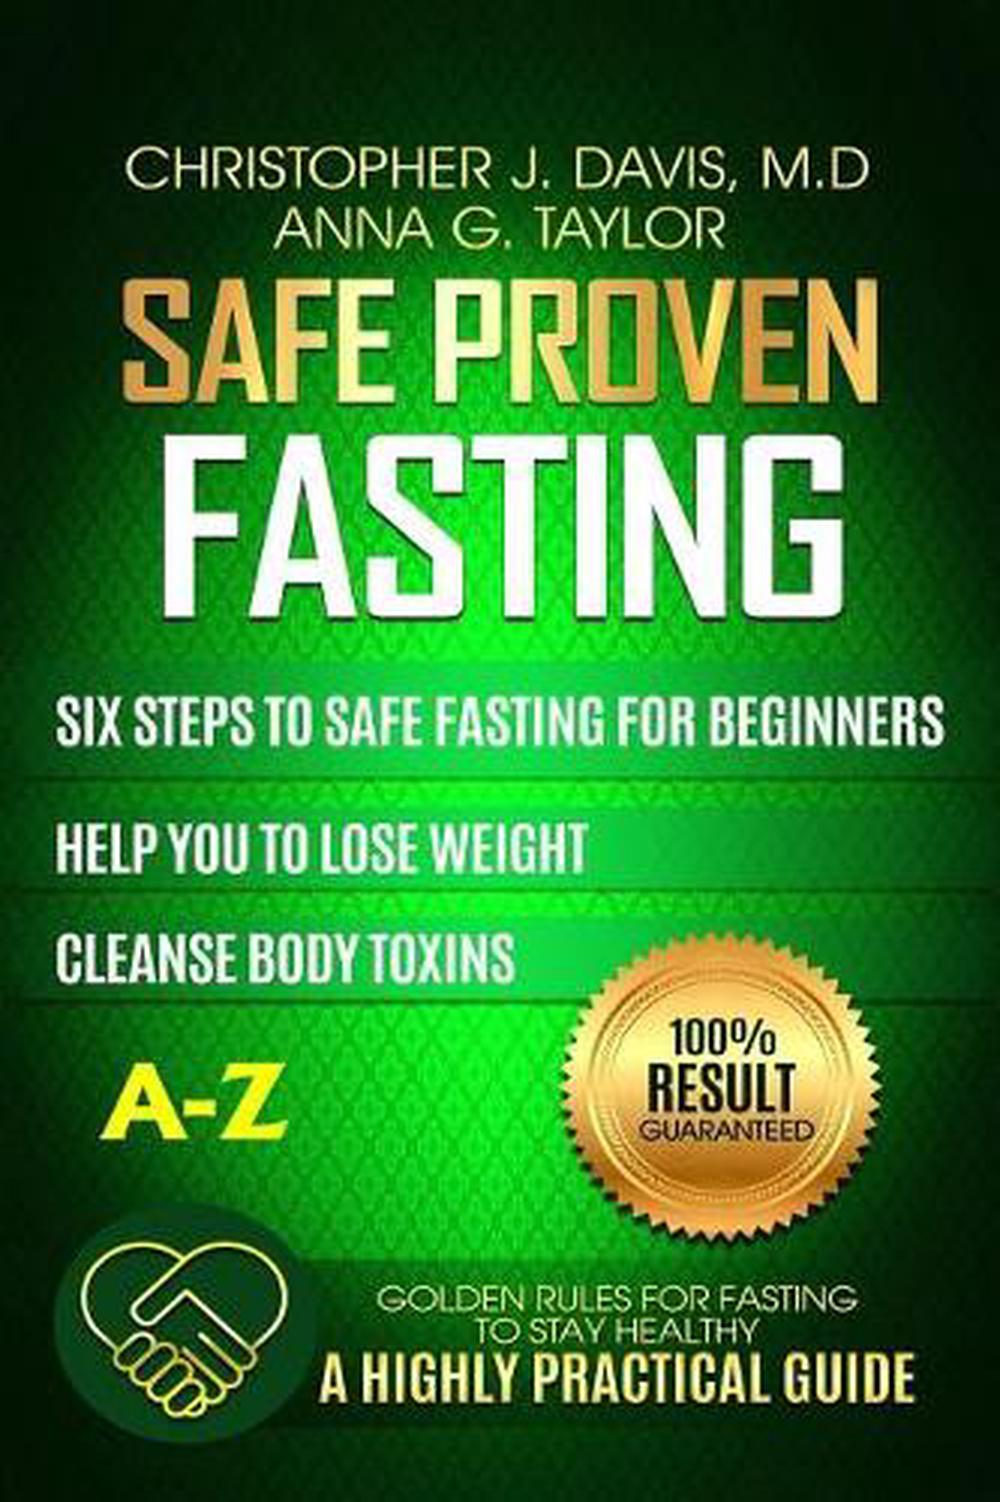 FastingSafe and Proven Fasting Guide Six Steps to Safe Fasting aZ